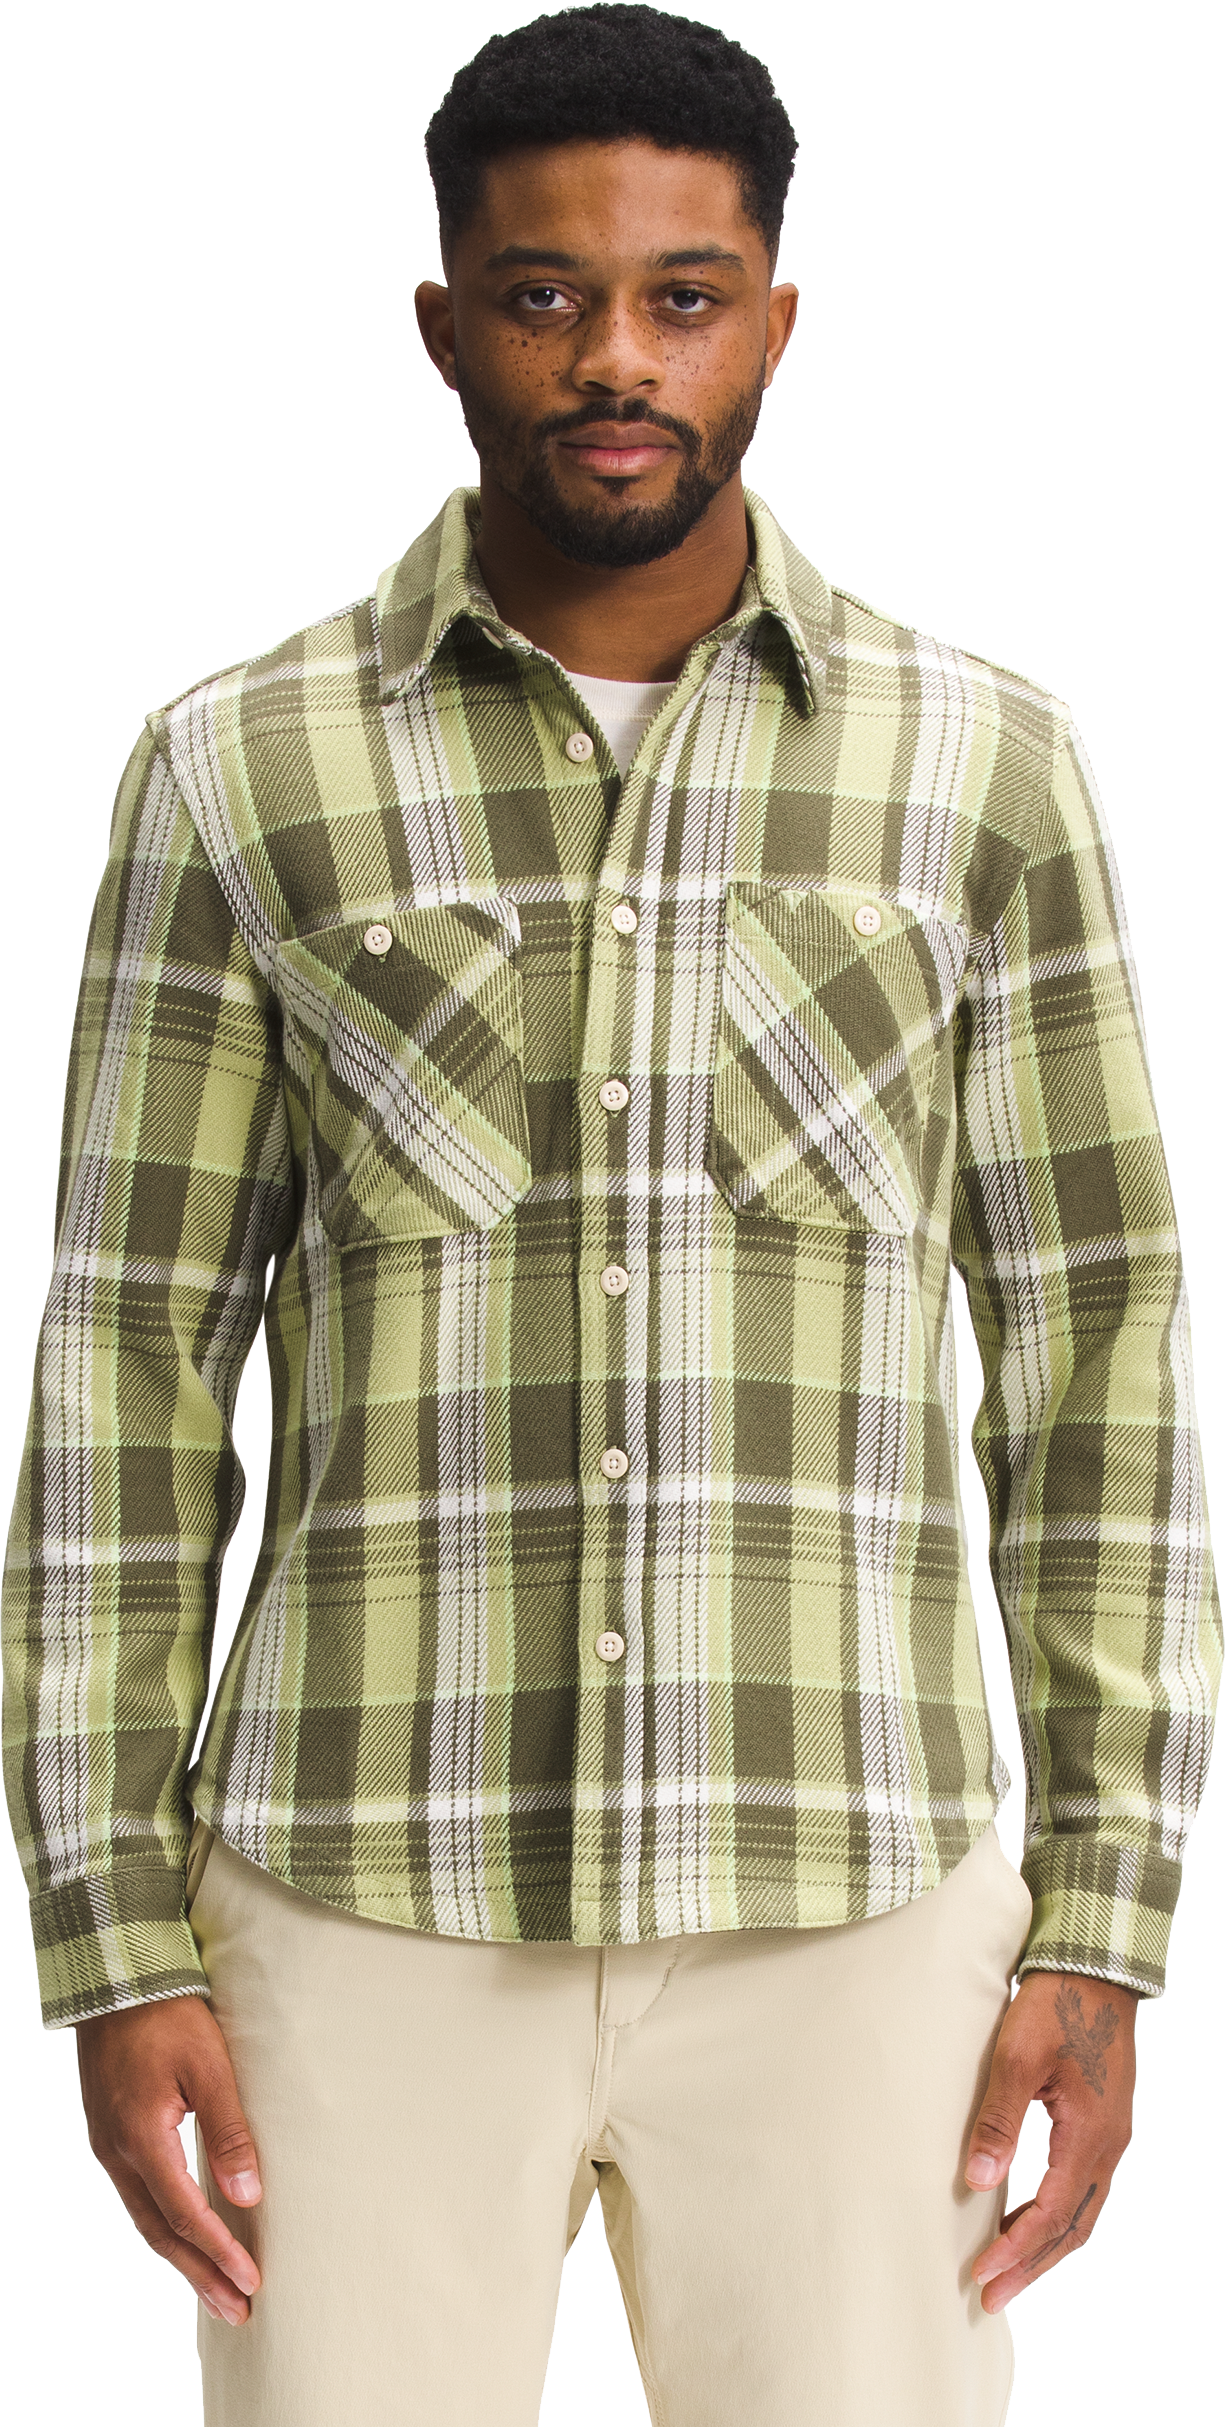 The North Face Valley Twill Flannel Long-Sleeve Shirt for Men - Goblin Blue Large HD Plaid - M